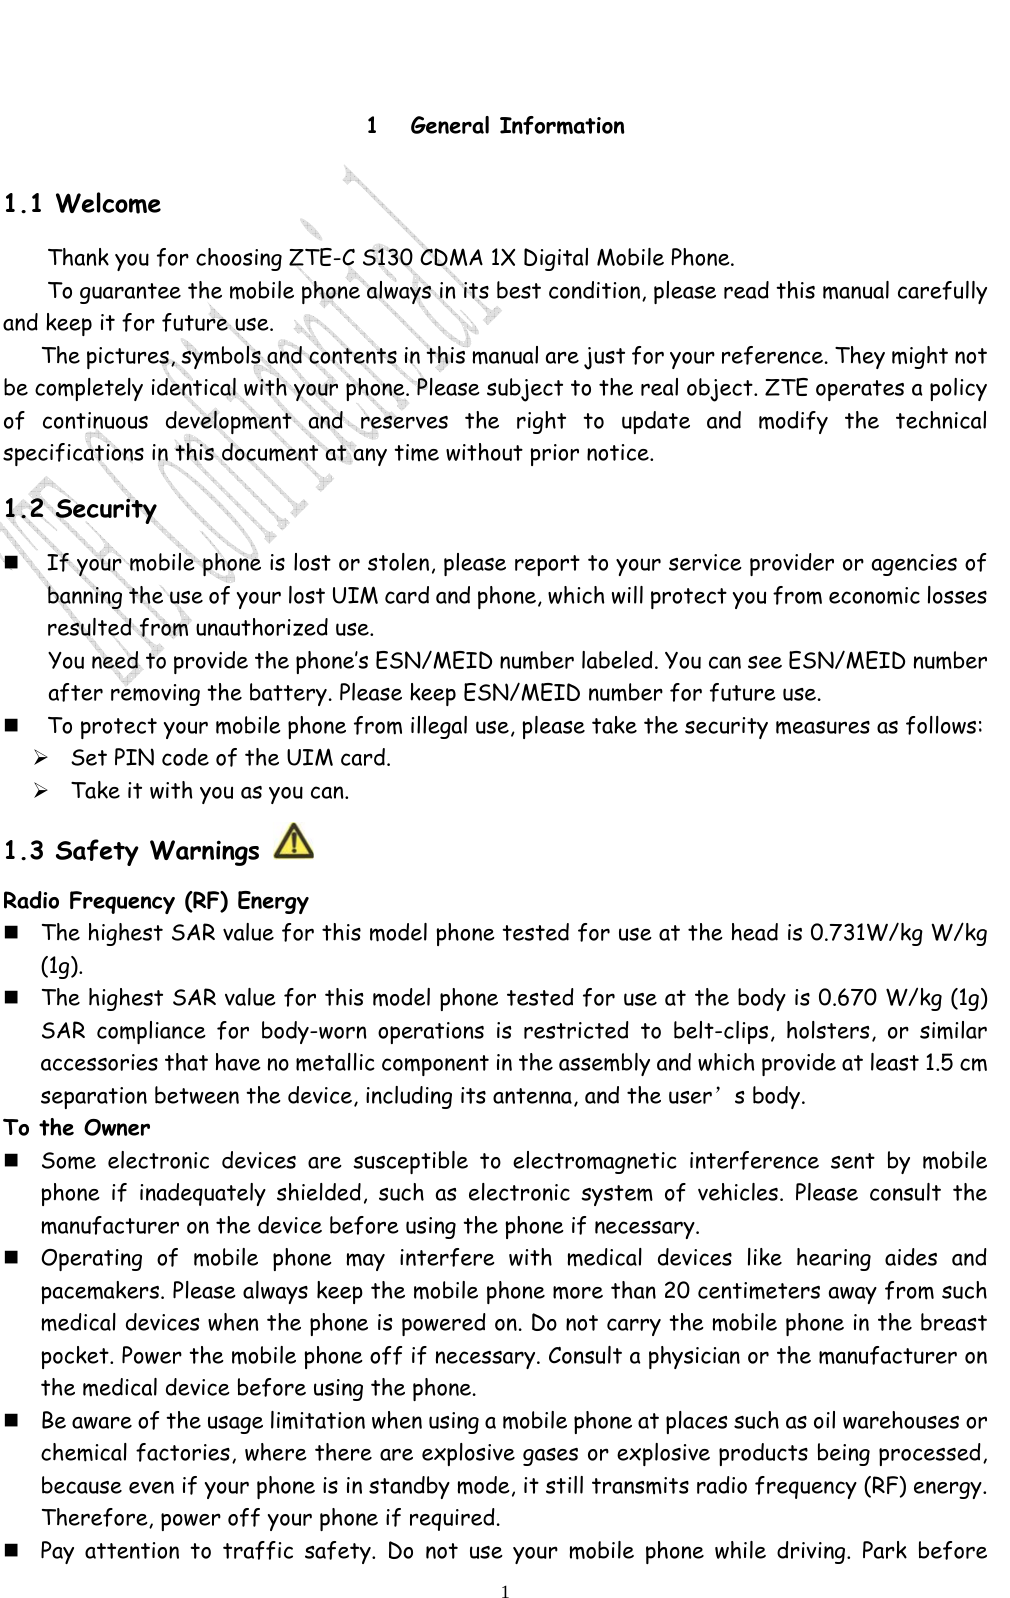                              1 1 General Information 1.1 Welcome Thank you for choosing ZTE-C S130 CDMA 1X Digital Mobile Phone.   To guarantee the mobile phone always in its best condition, please read this manual carefully and keep it for future use. The pictures, symbols and contents in this manual are just for your reference. They might not be completely identical with your phone. Please subject to the real object. ZTE operates a policy of continuous development and reserves the right to update and modify the technical specifications in this document at any time without prior notice. 1.2 Security  If your mobile phone is lost or stolen, please report to your service provider or agencies of banning the use of your lost UIM card and phone, which will protect you from economic losses resulted from unauthorized use. You need to provide the phone’s ESN/MEID number labeled. You can see ESN/MEID number after removing the battery. Please keep ESN/MEID number for future use.    To protect your mobile phone from illegal use, please take the security measures as follows: ¾ Set PIN code of the UIM card. ¾ Take it with you as you can.  1.3 Safety Warnings   Radio Frequency (RF) Energy   The highest SAR value for this model phone tested for use at the head is 0.731W/kg W/kg (1g).    The highest SAR value for this model phone tested for use at the body is 0.670 W/kg (1g) SAR compliance for body-worn operations is restricted to belt-clips, holsters, or similar accessories that have no metallic component in the assembly and which provide at least 1.5 cm separation between the device, including its antenna, and the user’s body.    To the Owner  Some electronic devices are susceptible to electromagnetic interference sent by mobile phone if inadequately shielded, such as electronic system of vehicles. Please consult the manufacturer on the device before using the phone if necessary.  Operating of mobile phone may interfere with medical devices like hearing aides and pacemakers. Please always keep the mobile phone more than 20 centimeters away from such medical devices when the phone is powered on. Do not carry the mobile phone in the breast pocket. Power the mobile phone off if necessary. Consult a physician or the manufacturer on the medical device before using the phone.  Be aware of the usage limitation when using a mobile phone at places such as oil warehouses or chemical factories, where there are explosive gases or explosive products being processed, because even if your phone is in standby mode, it still transmits radio frequency (RF) energy. Therefore, power off your phone if required.  Pay attention to traffic safety. Do not use your mobile phone while driving. Park before 